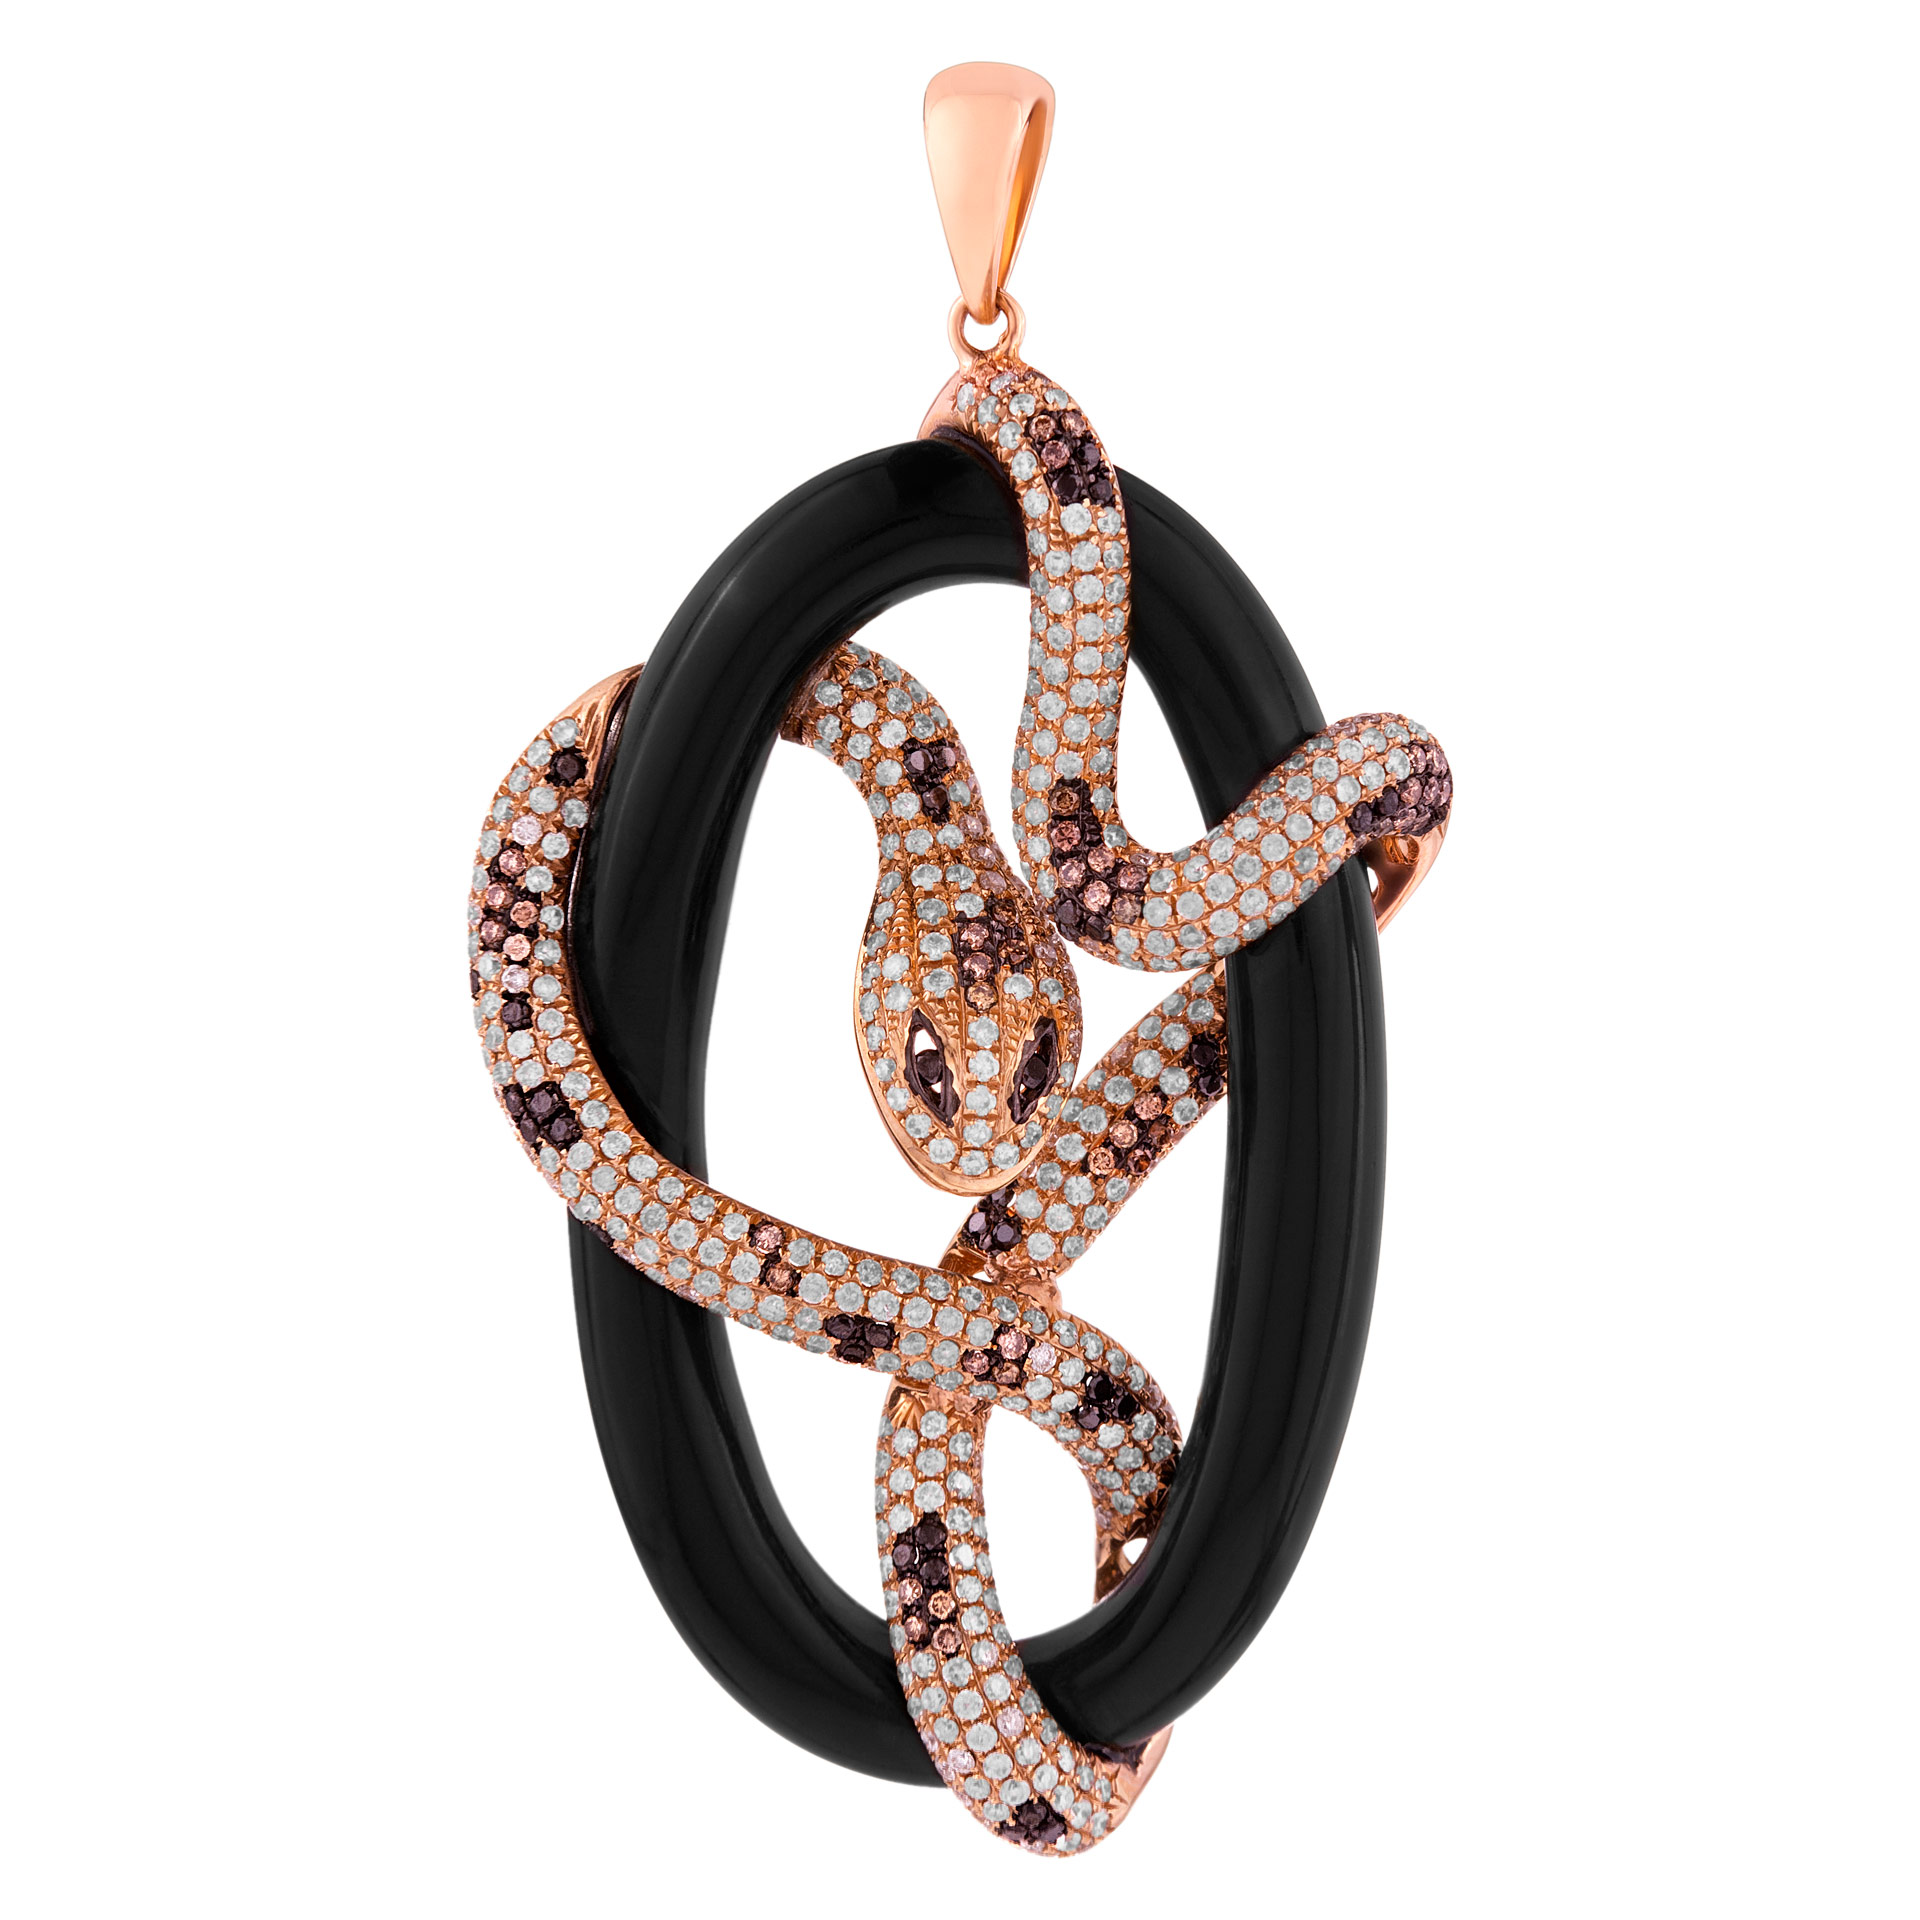 Snake pendant in onyx, diamonds and 18K pink gold. 21.26cts of Onyx image 1